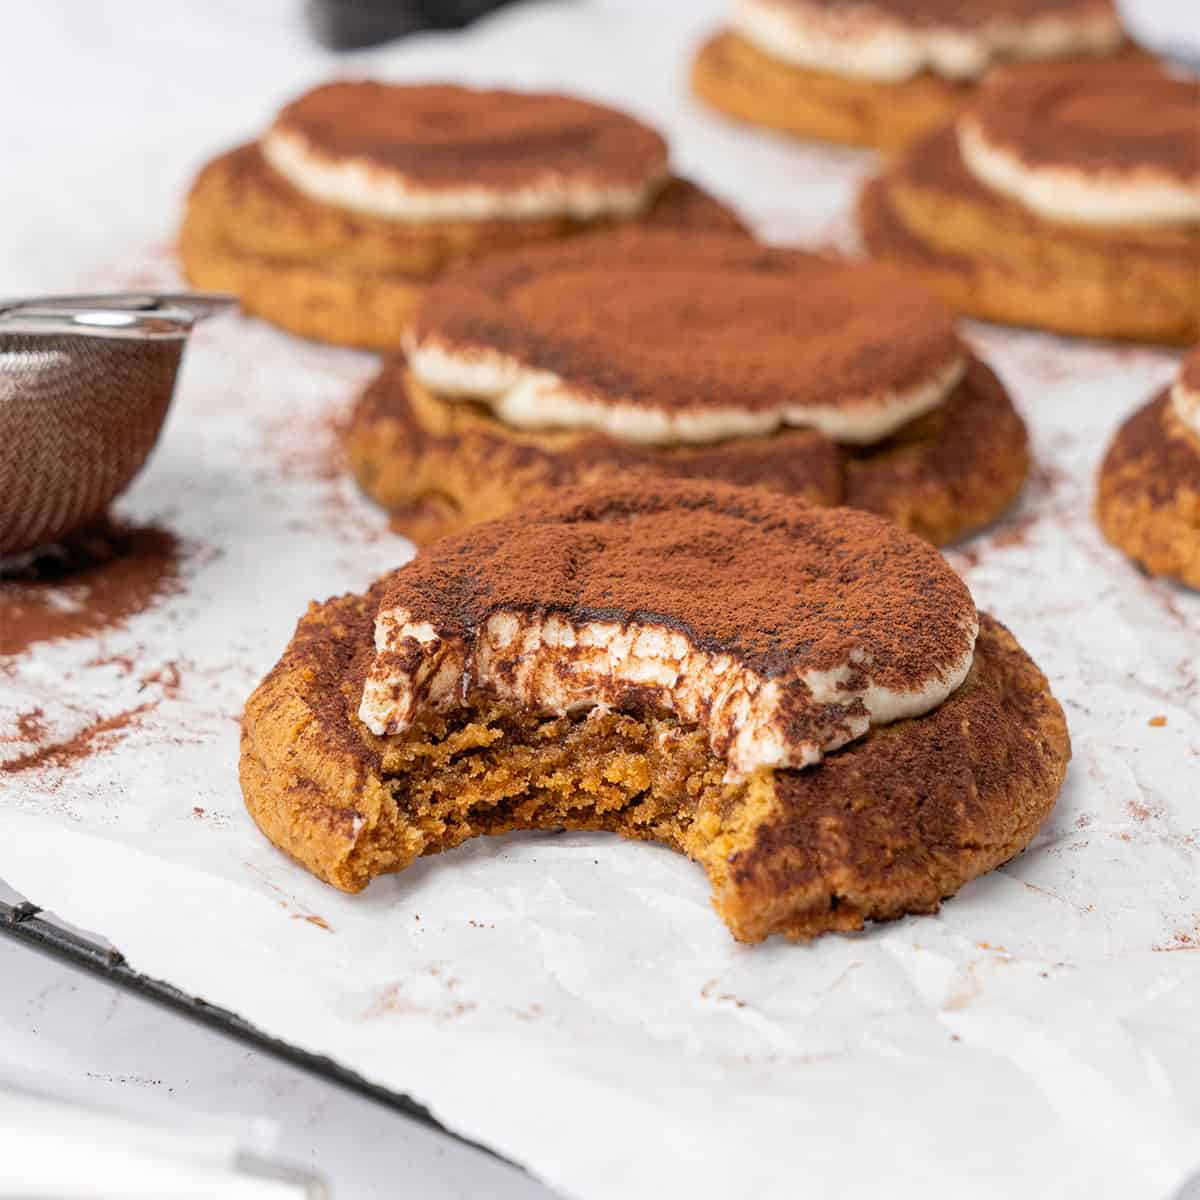 <p>These delicious, coffee-flavored <a href="https://www.spatuladesserts.com/tiramisu-cookies/"><strong>tiramisu cookies</strong></a> are the perfect after-dinner treat, dessert table addition, or compliment to your morning cup of coffee. A delightful twist on the classic Italian dessert, this easy tiramisu cookie recipe combines espresso powder and sweet mascarpone frosting topped with cocoa powder.</p> <p><strong>Go to the recipe: <a href="https://www.spatuladesserts.com/tiramisu-cookies/">Tiramisu Cokies</a></strong></p>